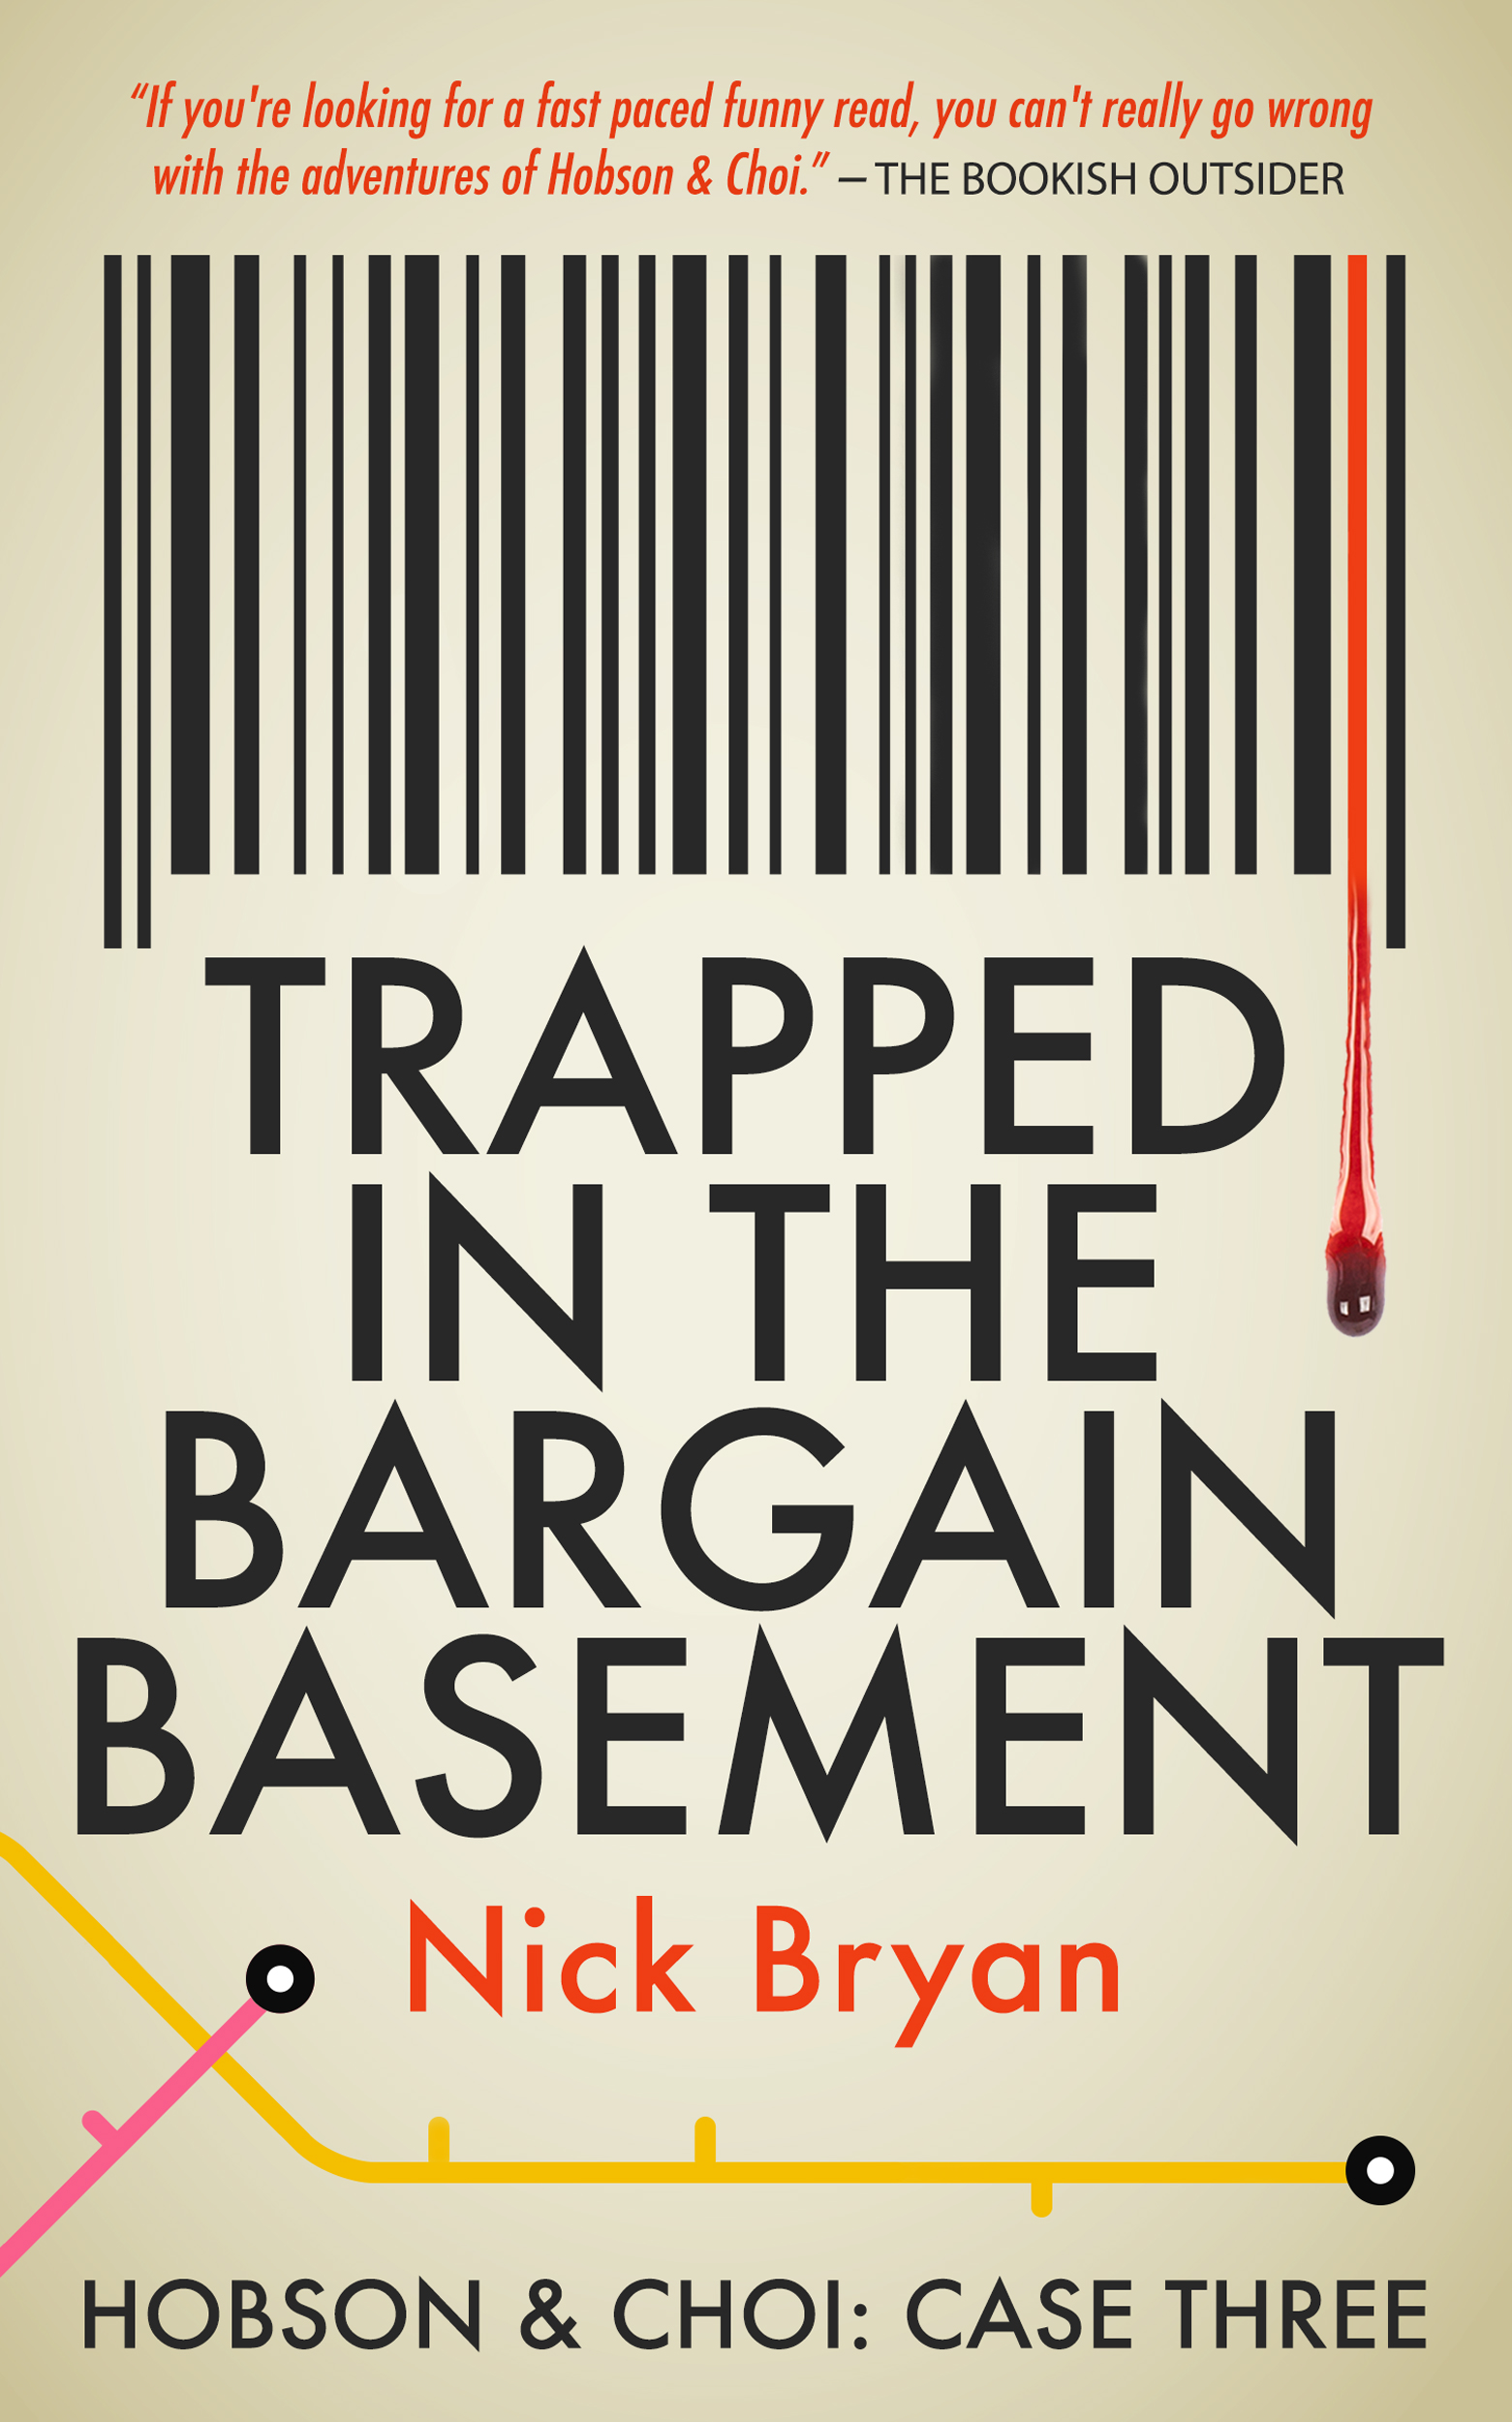 TRAPPED IN THE BARGAIN BASEMENT